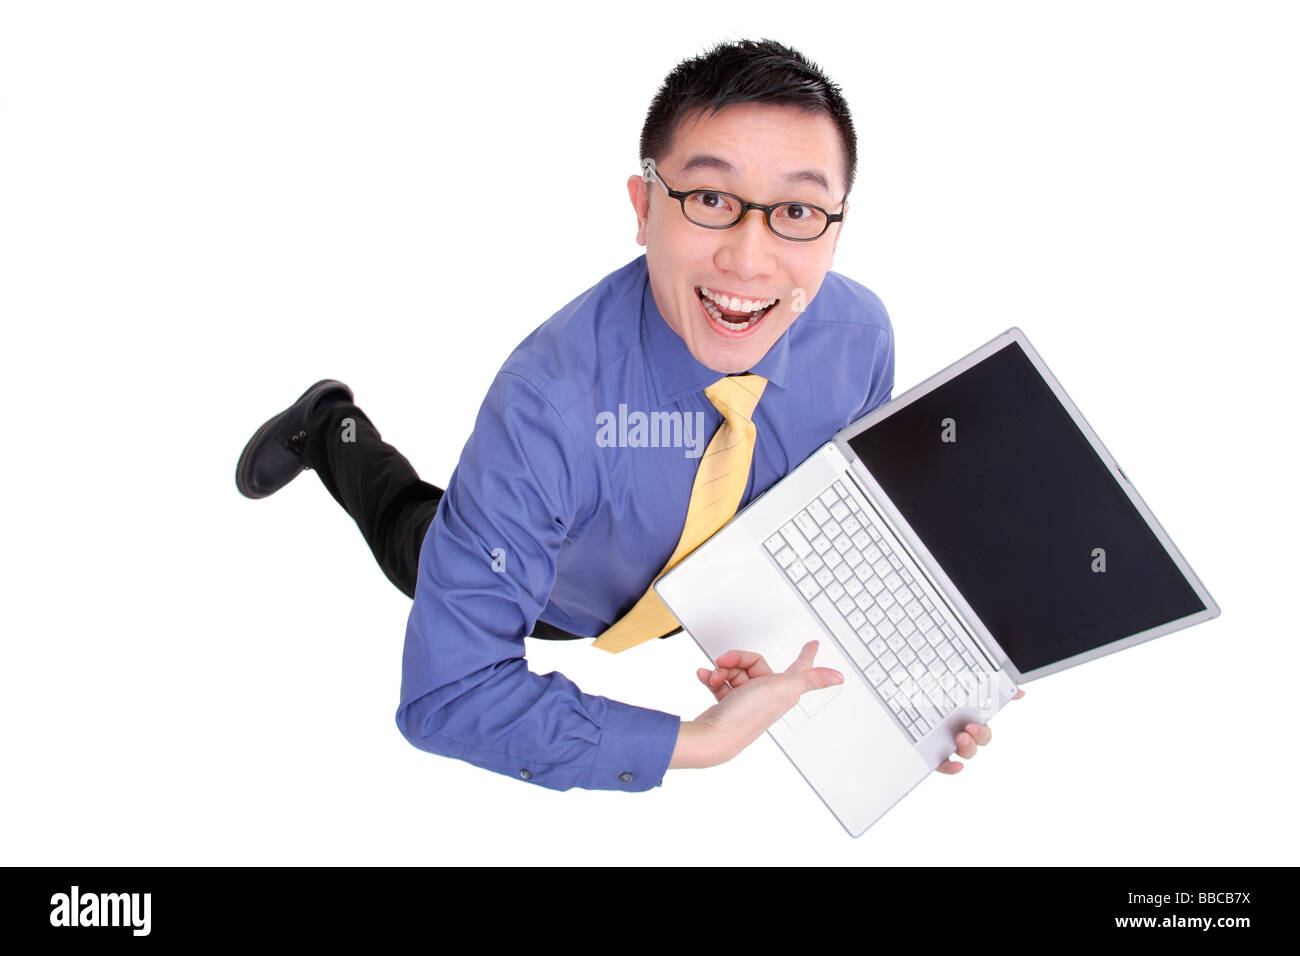 High angle view of businessman pointing at laptop Banque D'Images